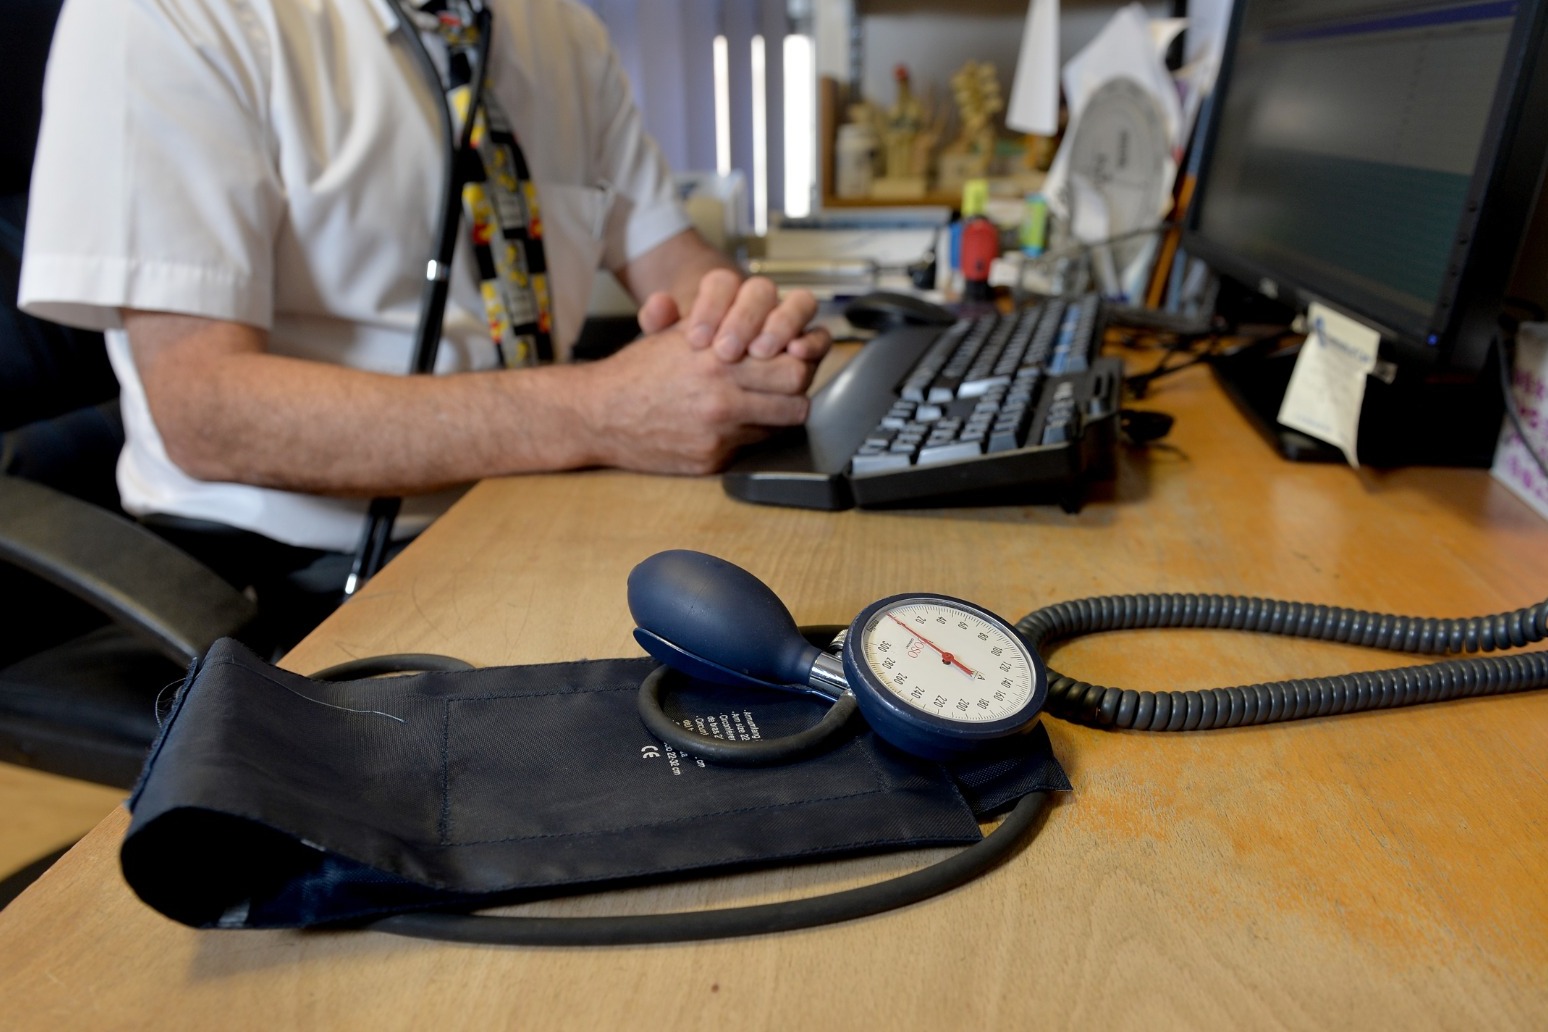 GP appointments over the phone or online can ‘put patients at risk’ 